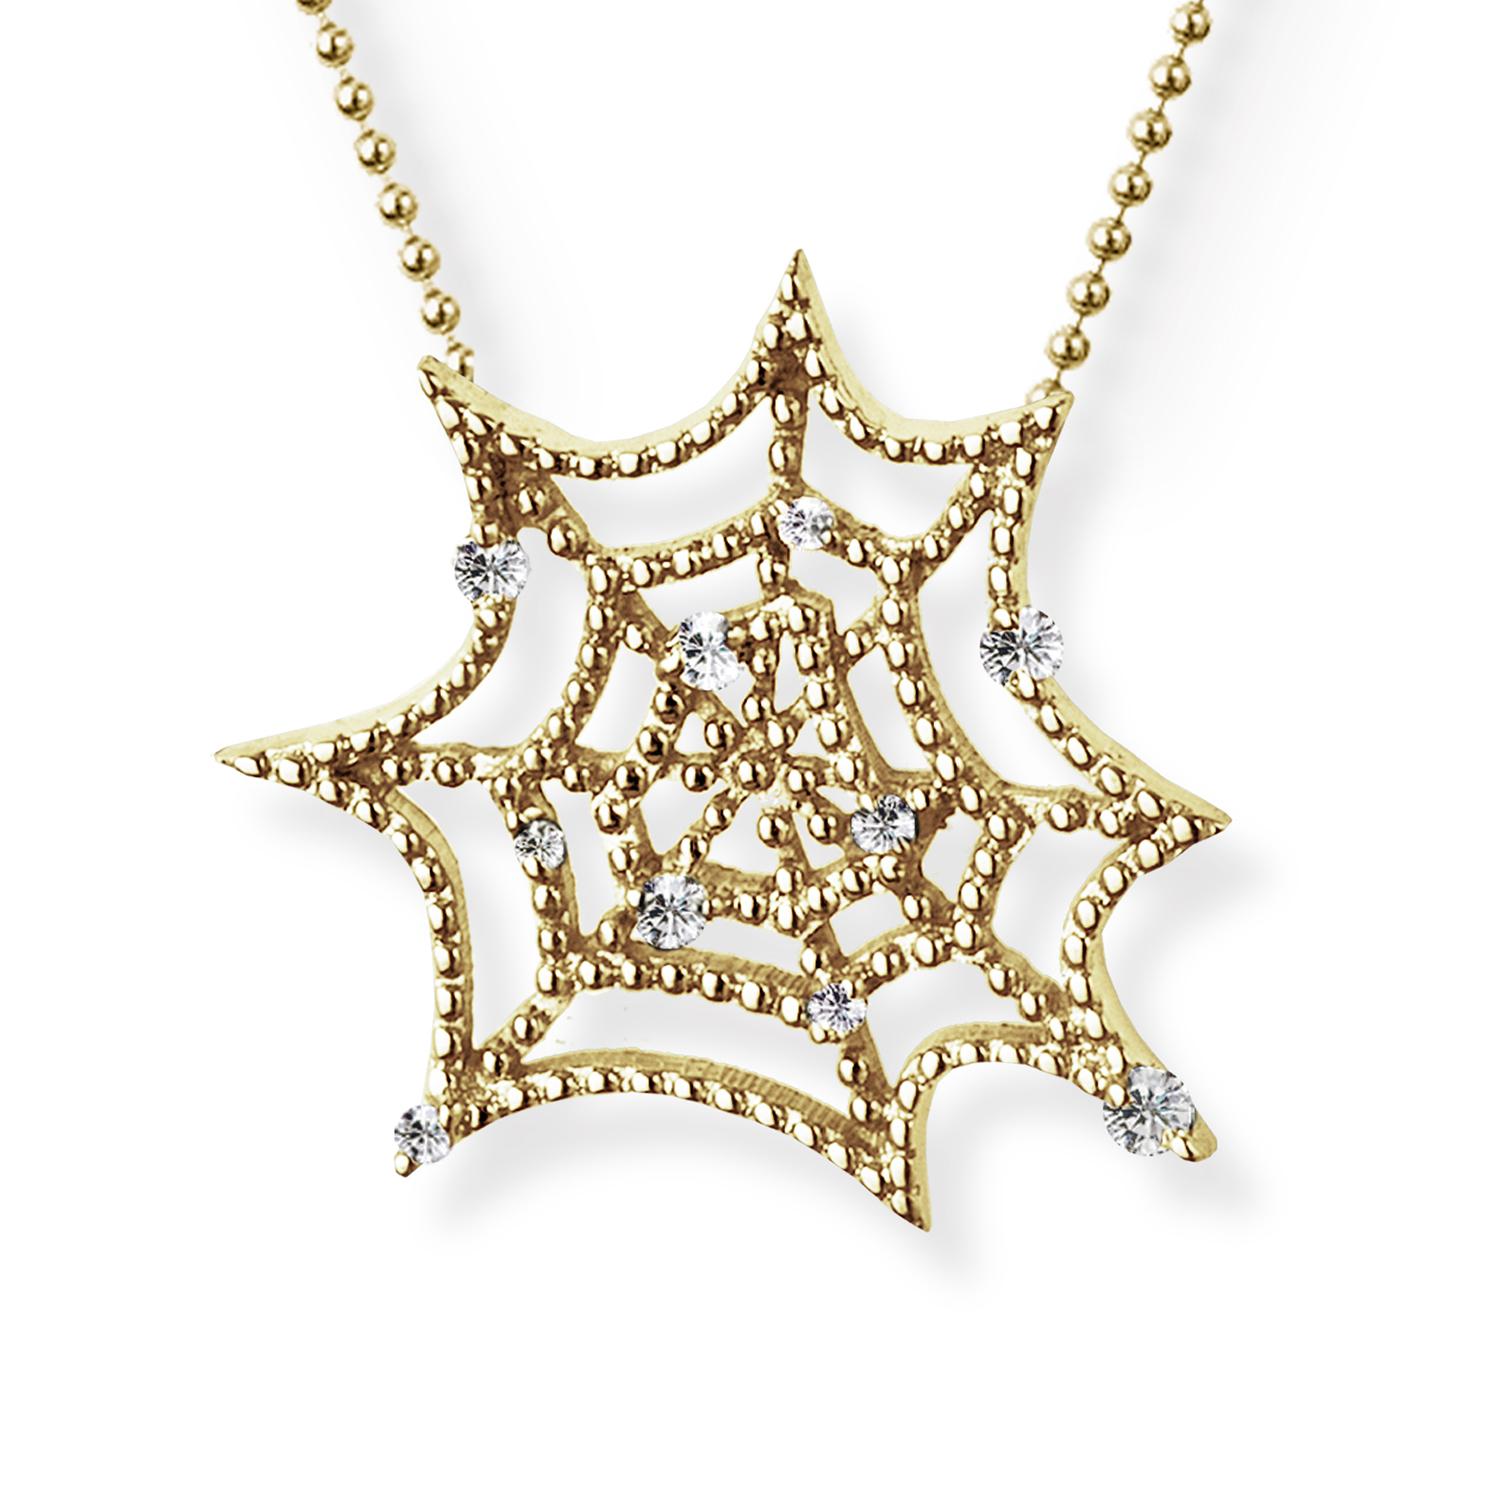 Discover the captivating Spiderweb Necklace in Yellow Gold Plating with White Sapphires. This limited edition piece beautifully captures the delicate and luminous nature of a spider's web—a finely crafted home and an irresistible trap.

The necklace